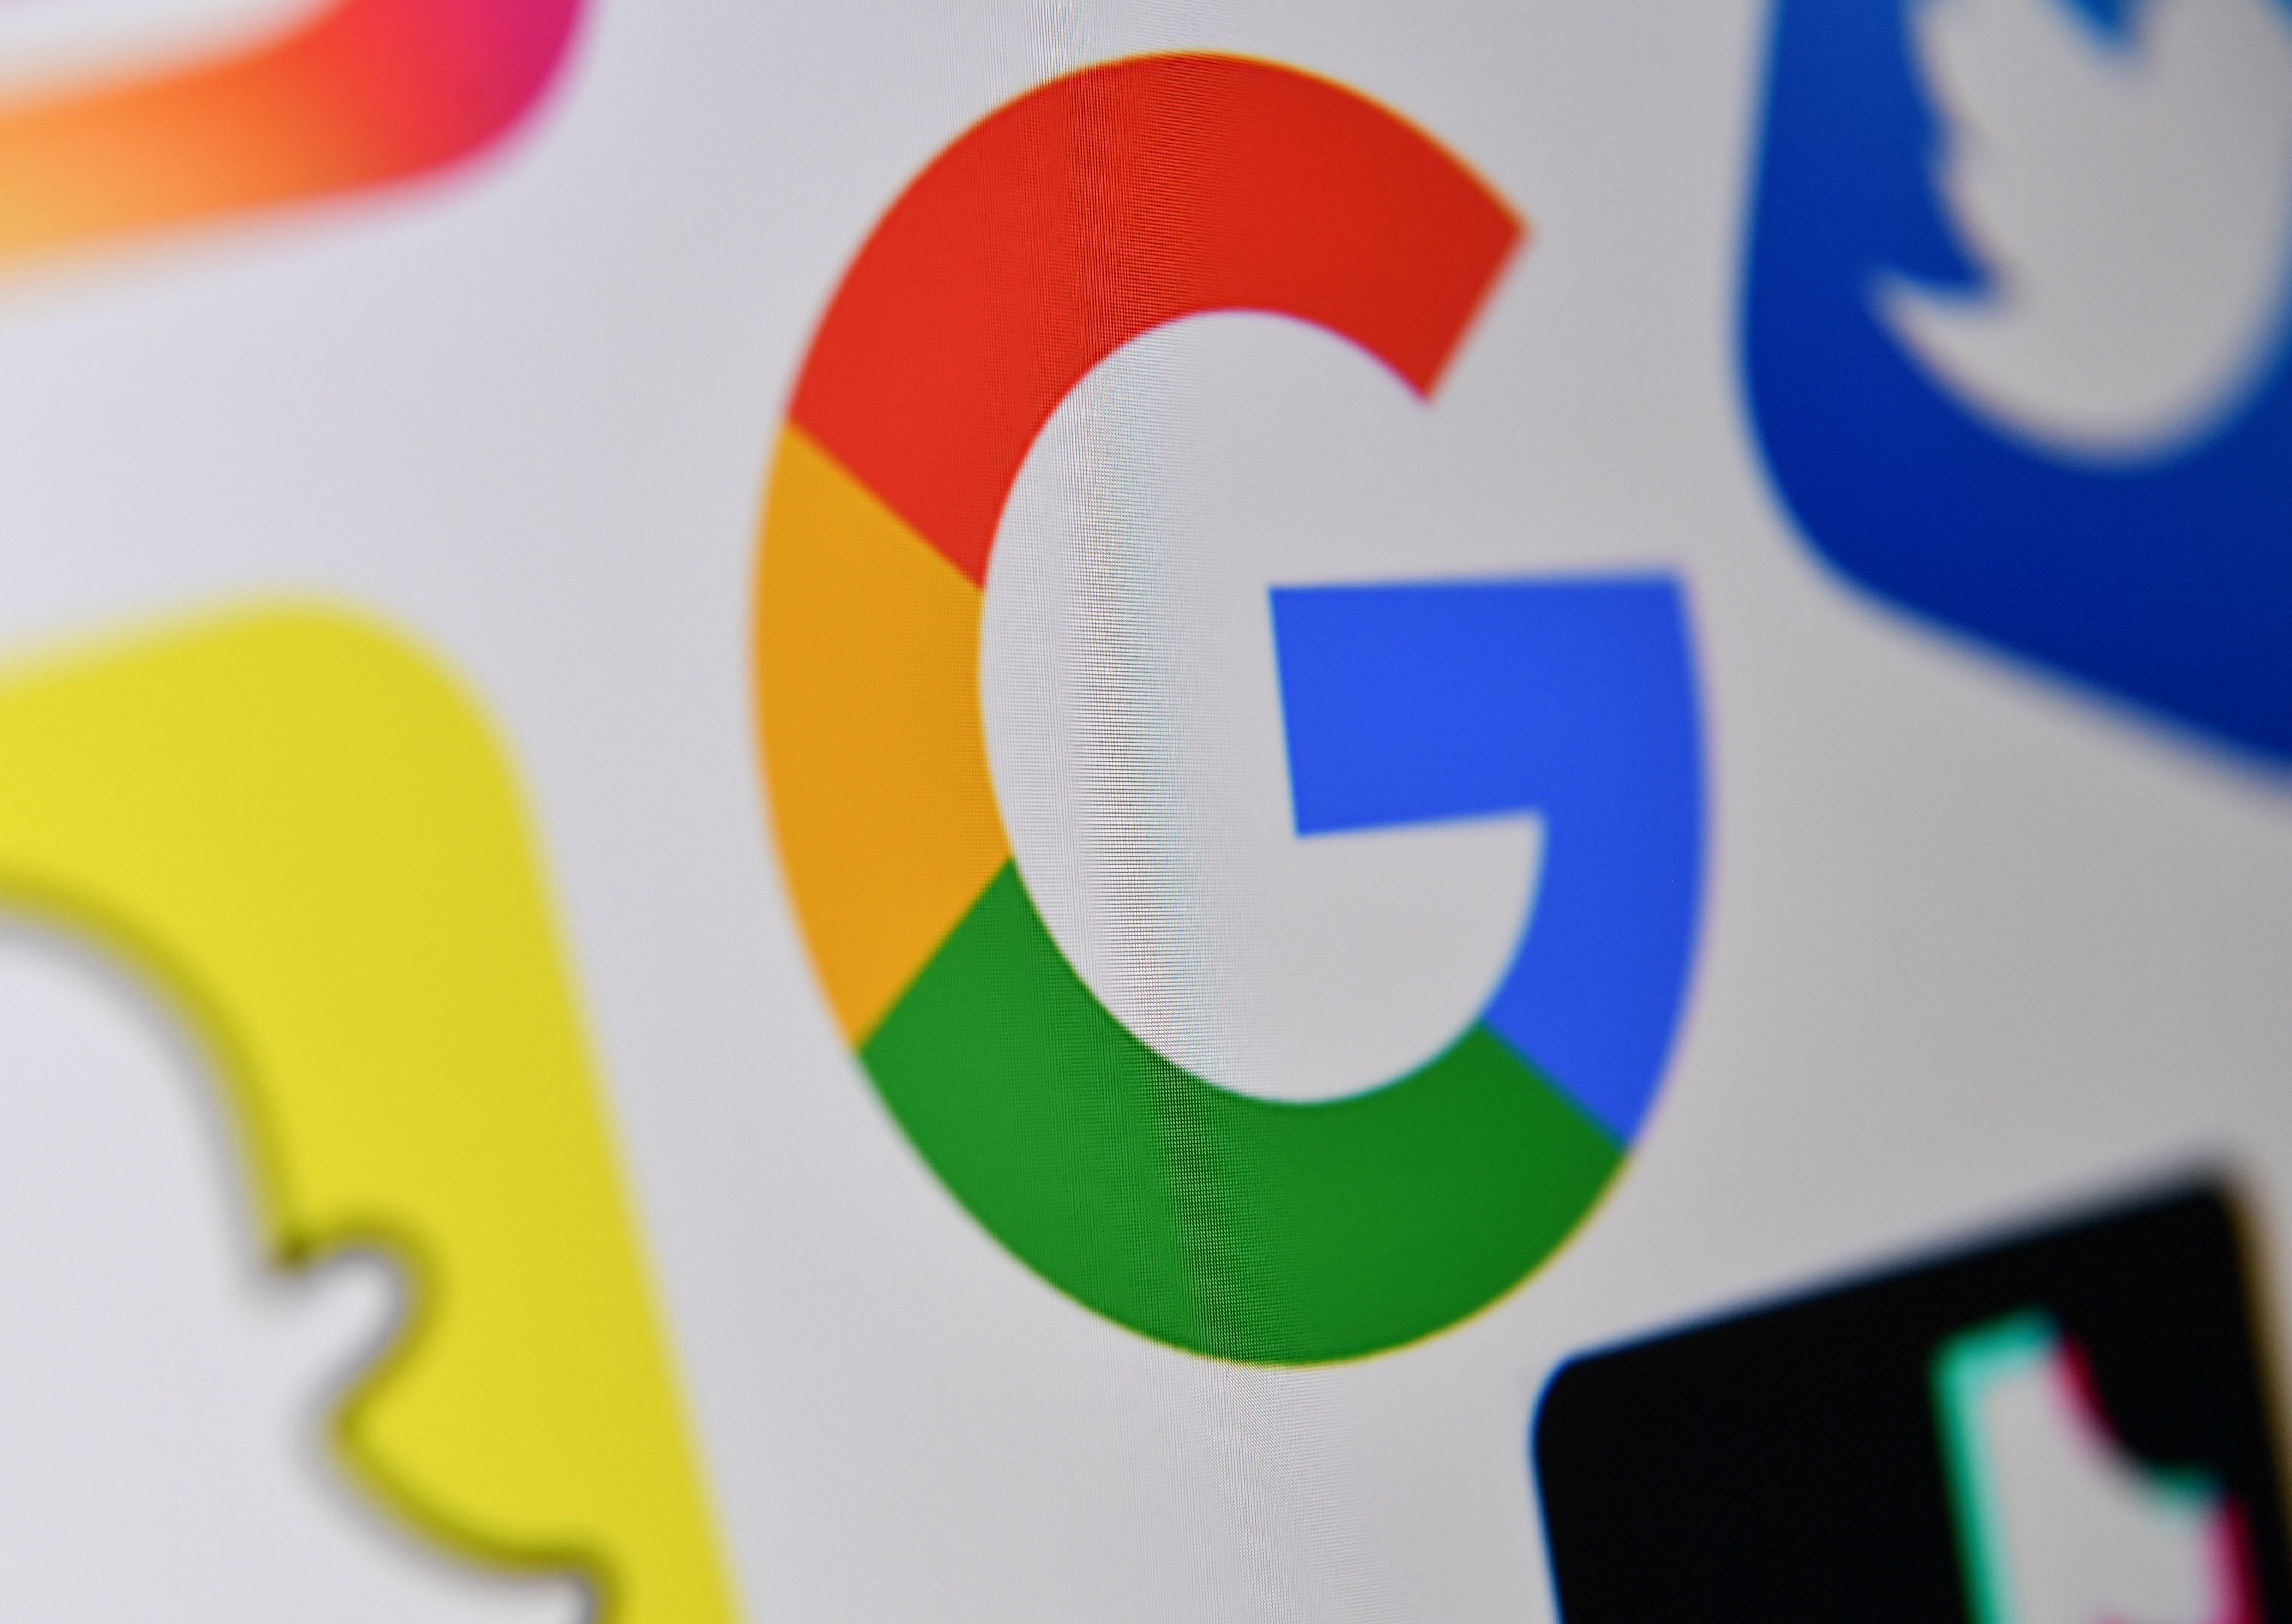 The Alphabet Inc owned company benefited from vast amounts of internet user data from its search engine, mapping and YouTube. Credit: AFP Photo